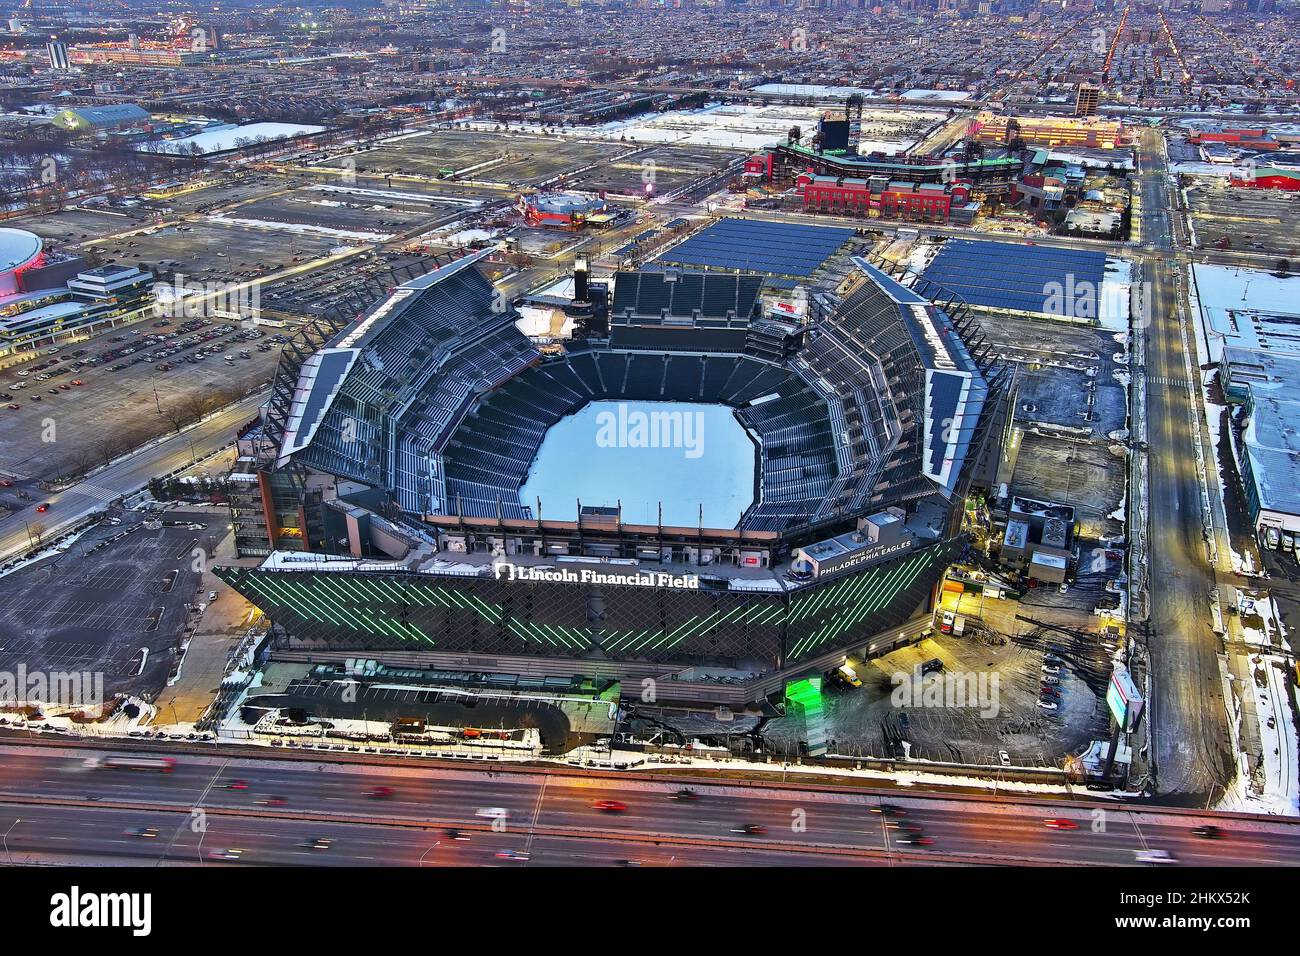 Aerial View of Lincoln Financial Field with Citizen's Bank Park in the Background Stock Photo